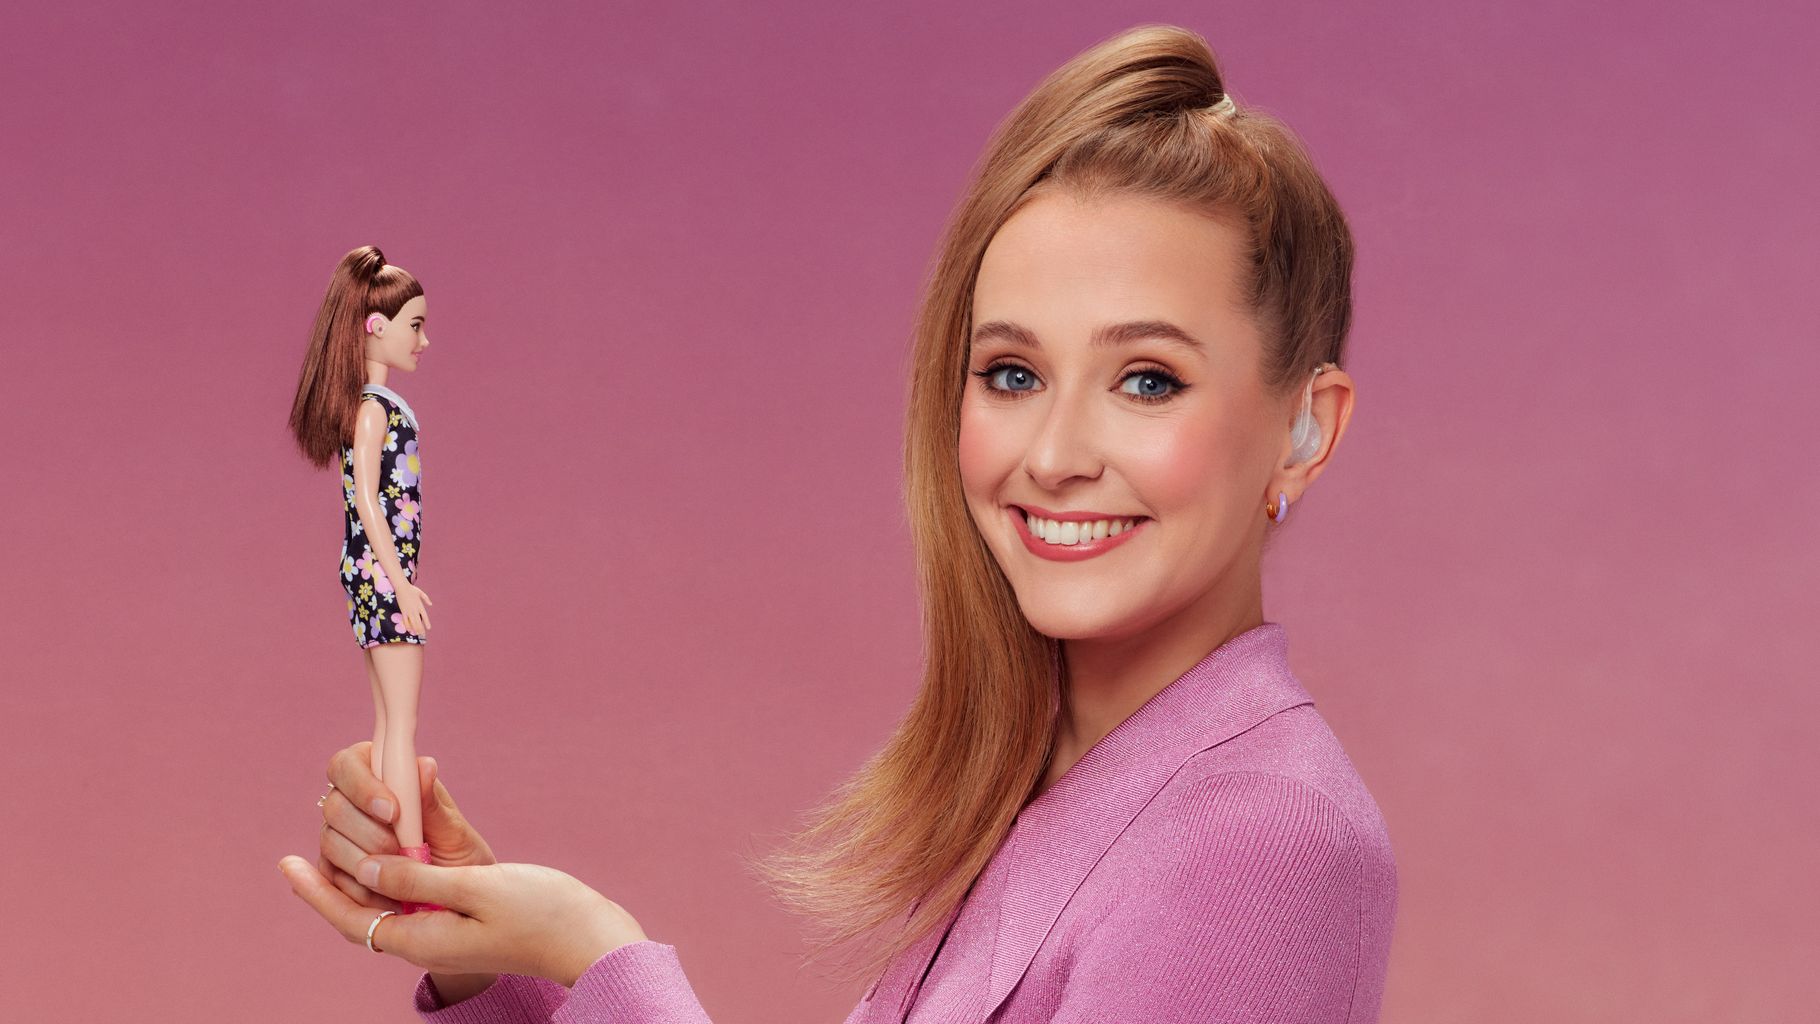 Strictly winner Rose unveils first Barbie doll with hearing aid